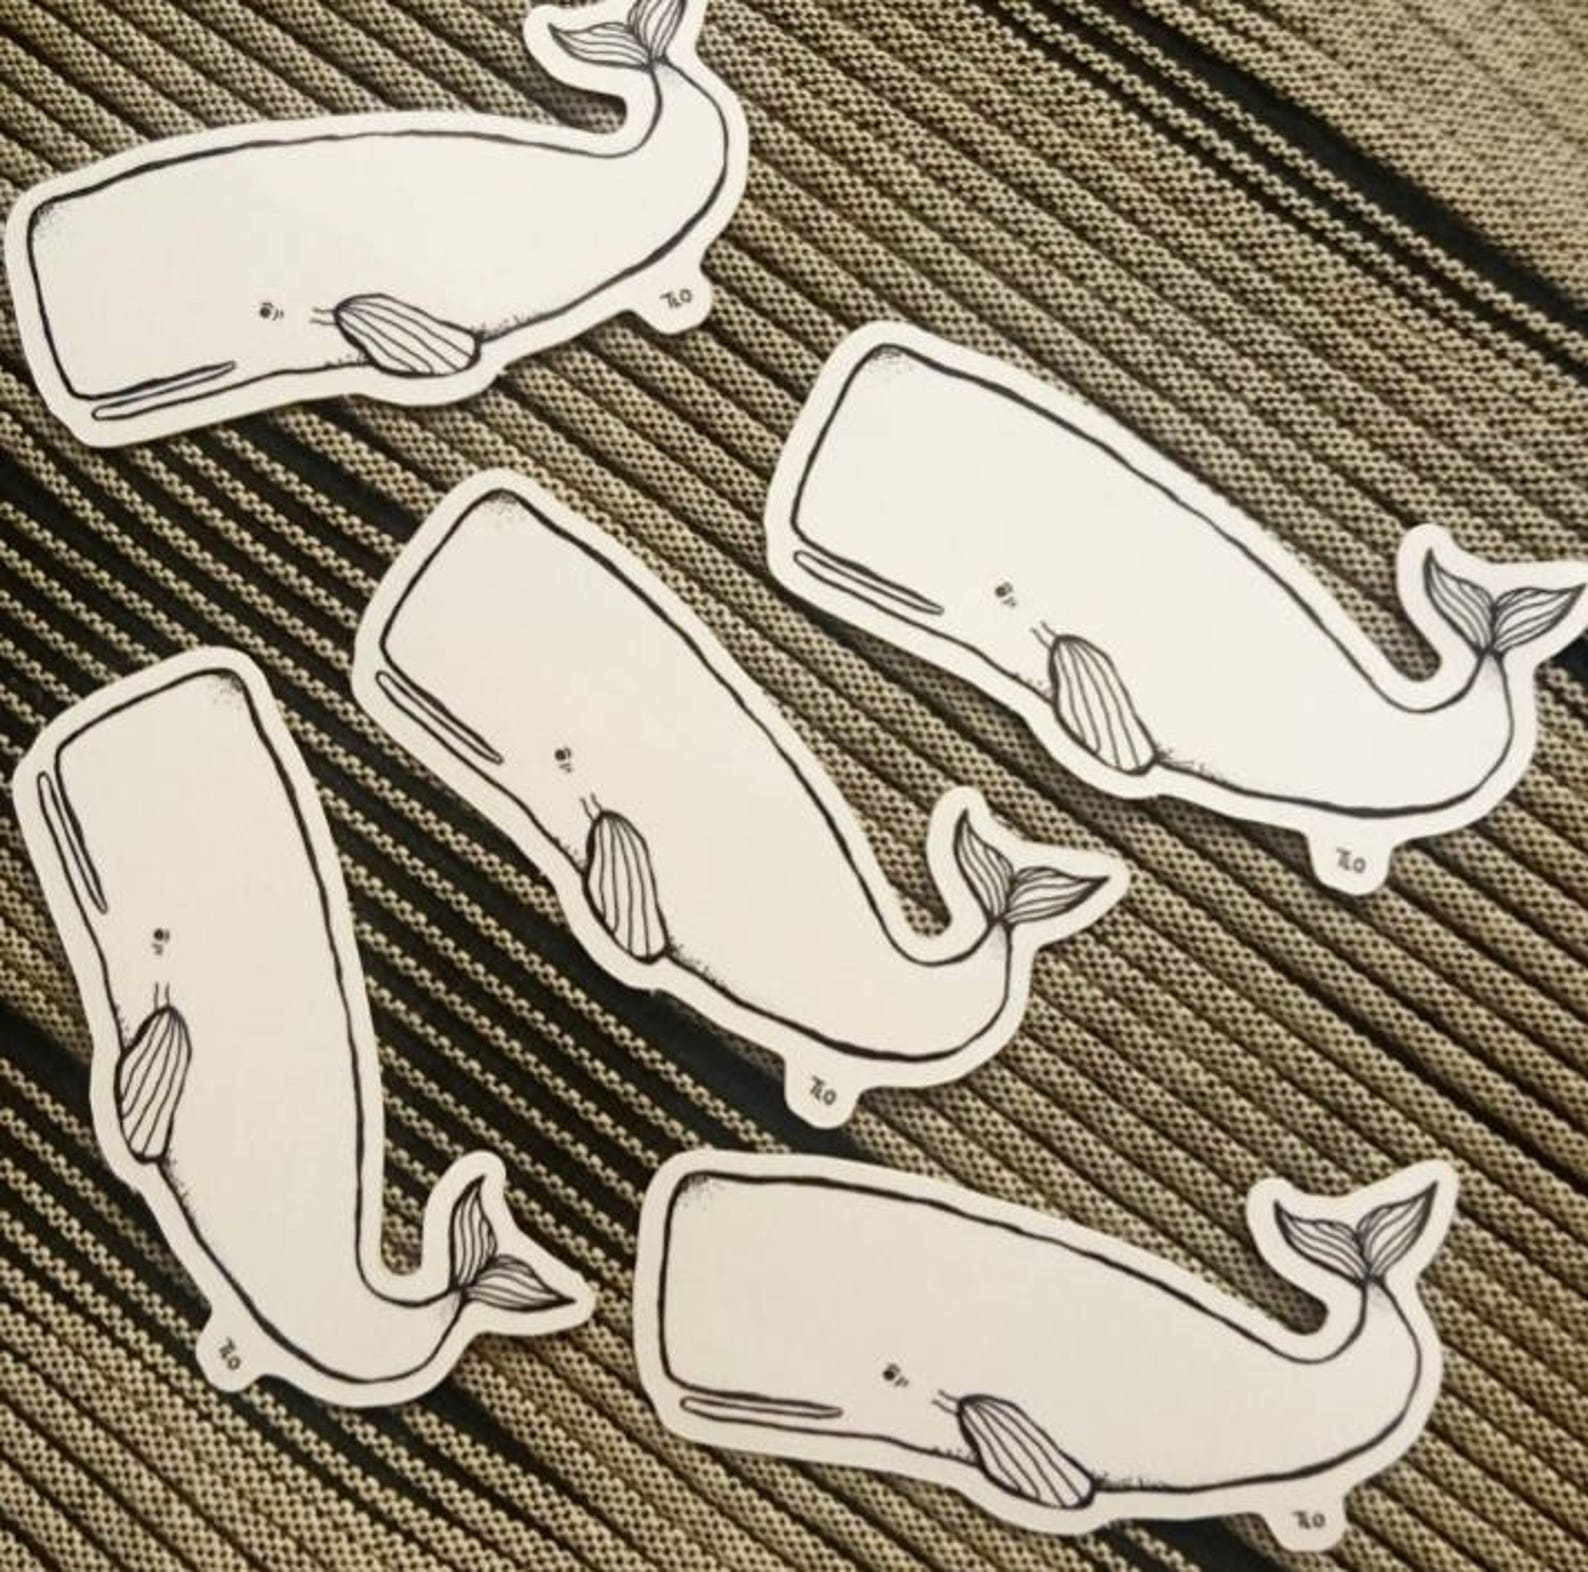 Stickers Cute Sperm Whale sticker pack 4pack | Etsy